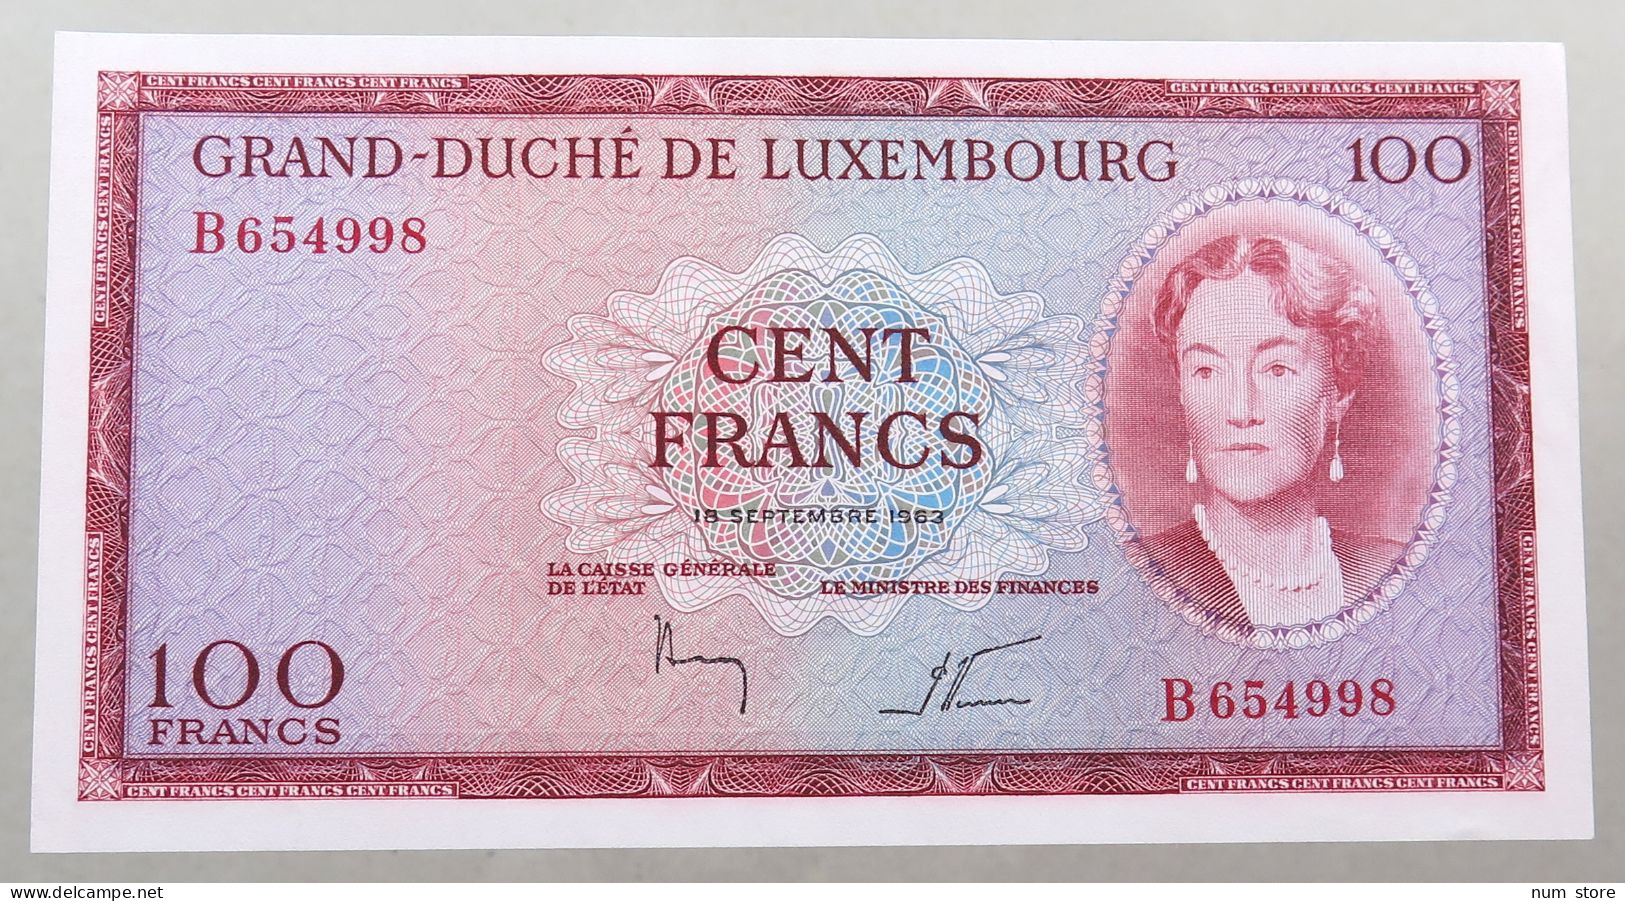 LUXEMBOURG 100 FRANCS 1963  #alb051 1547 - Luxembourg